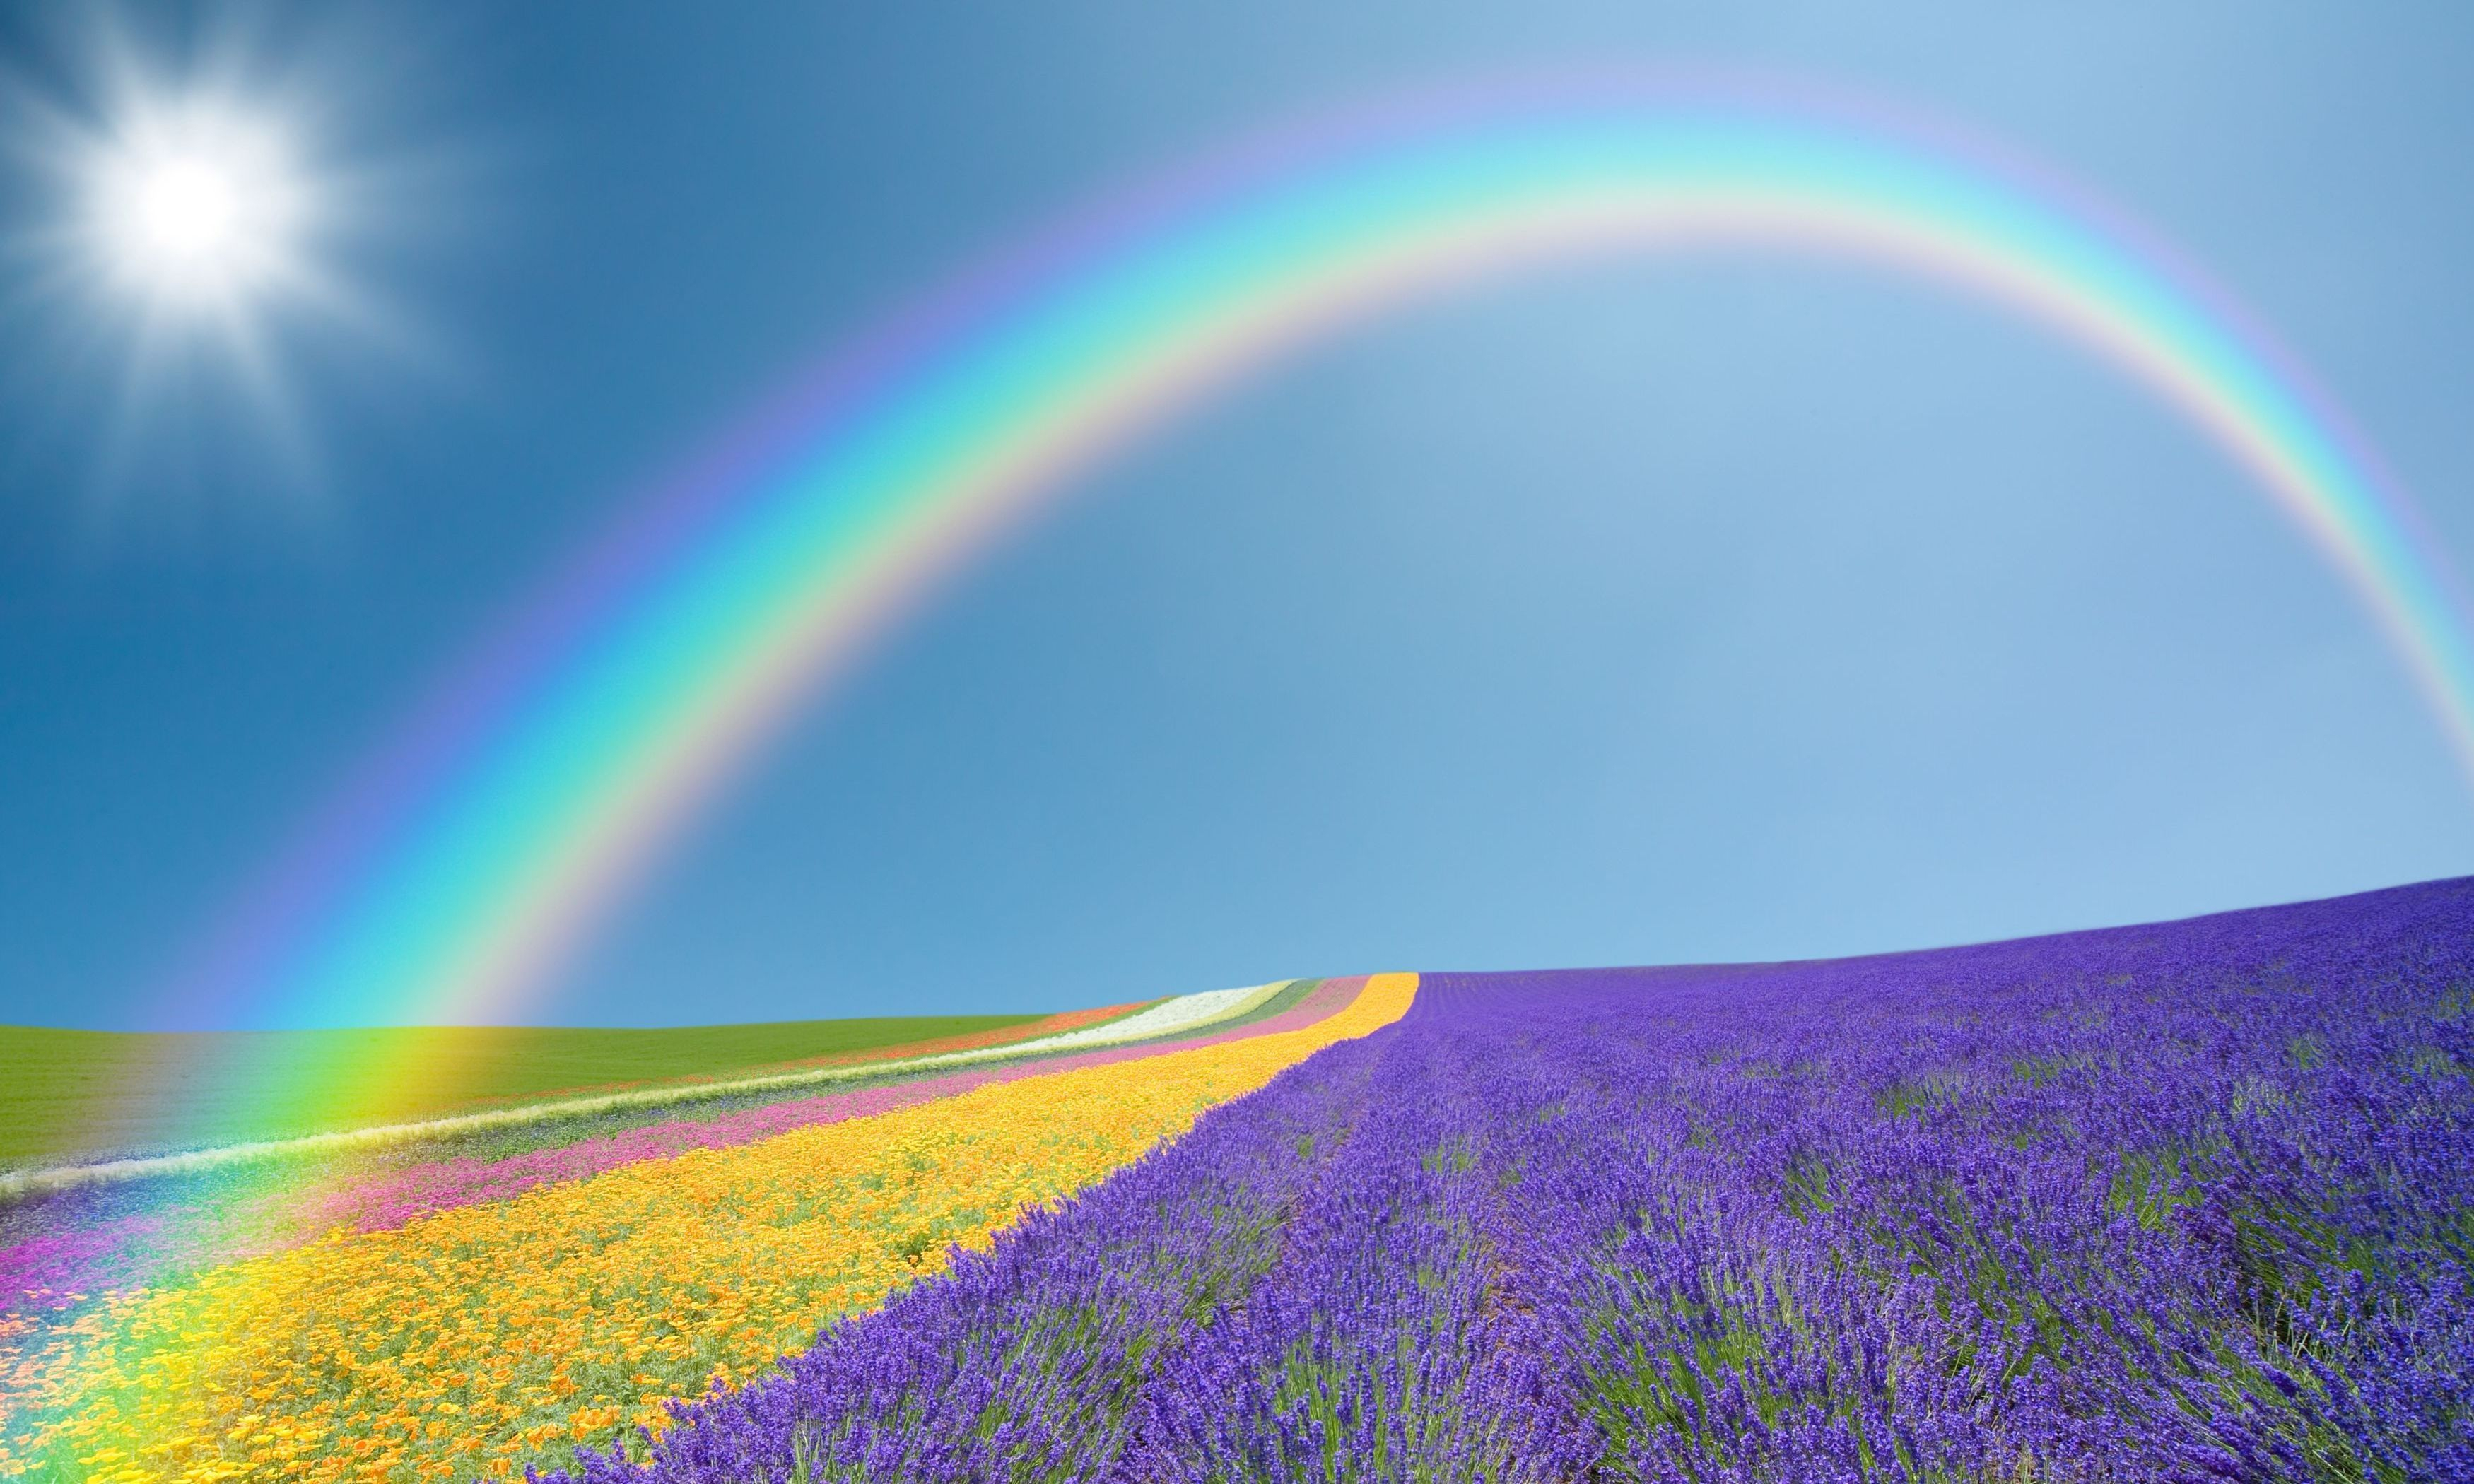 A rainbow over a field of lavender and yellow flowers - Spring, rainbows